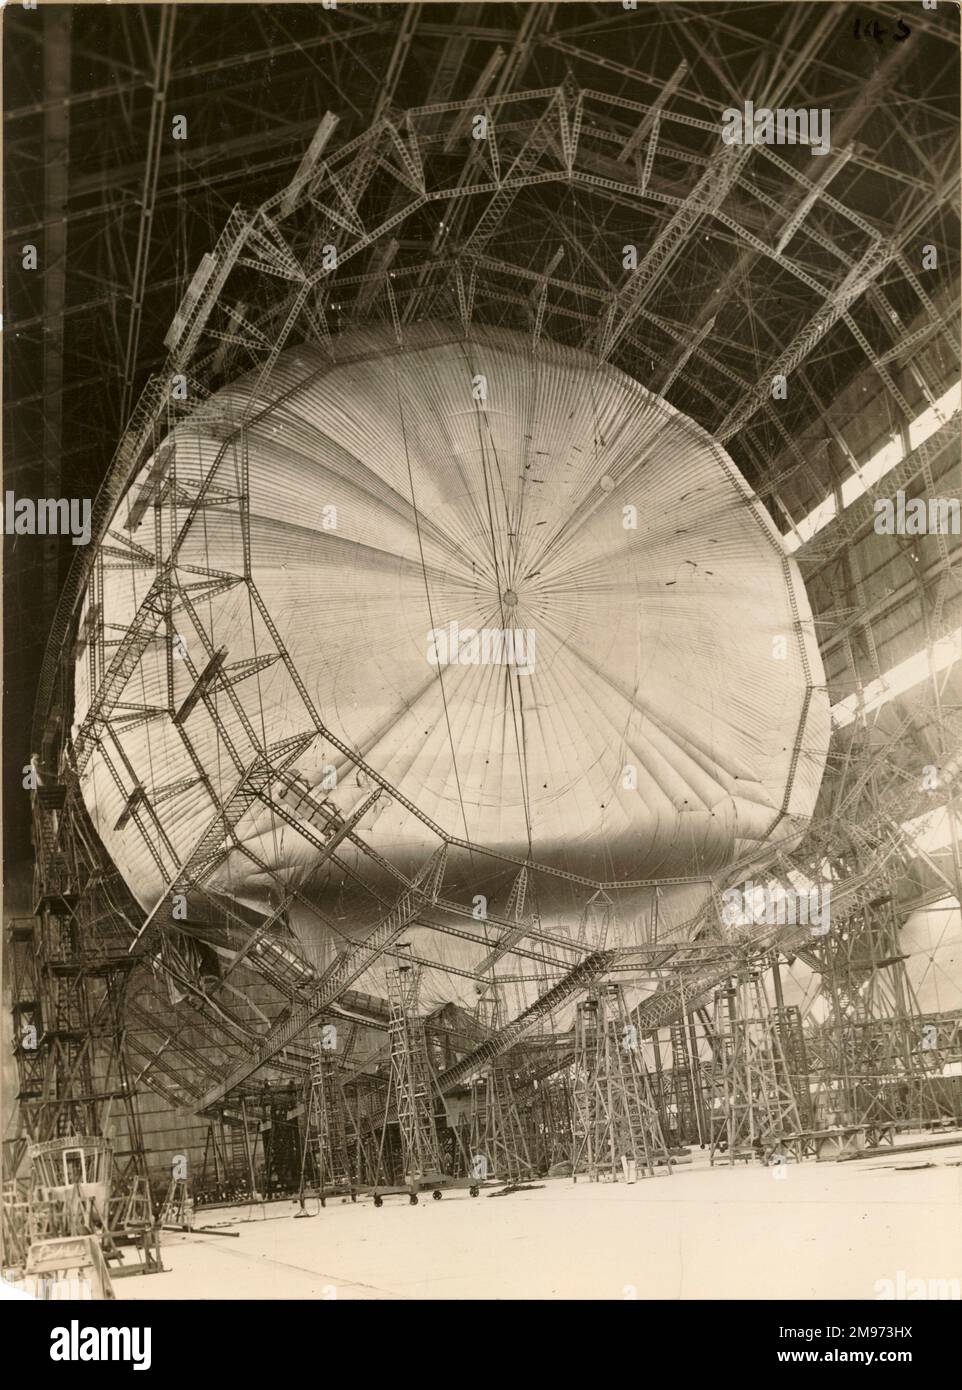 The R101 airship during construction showing the structure and a partially inflated gasbag. Stock Photo